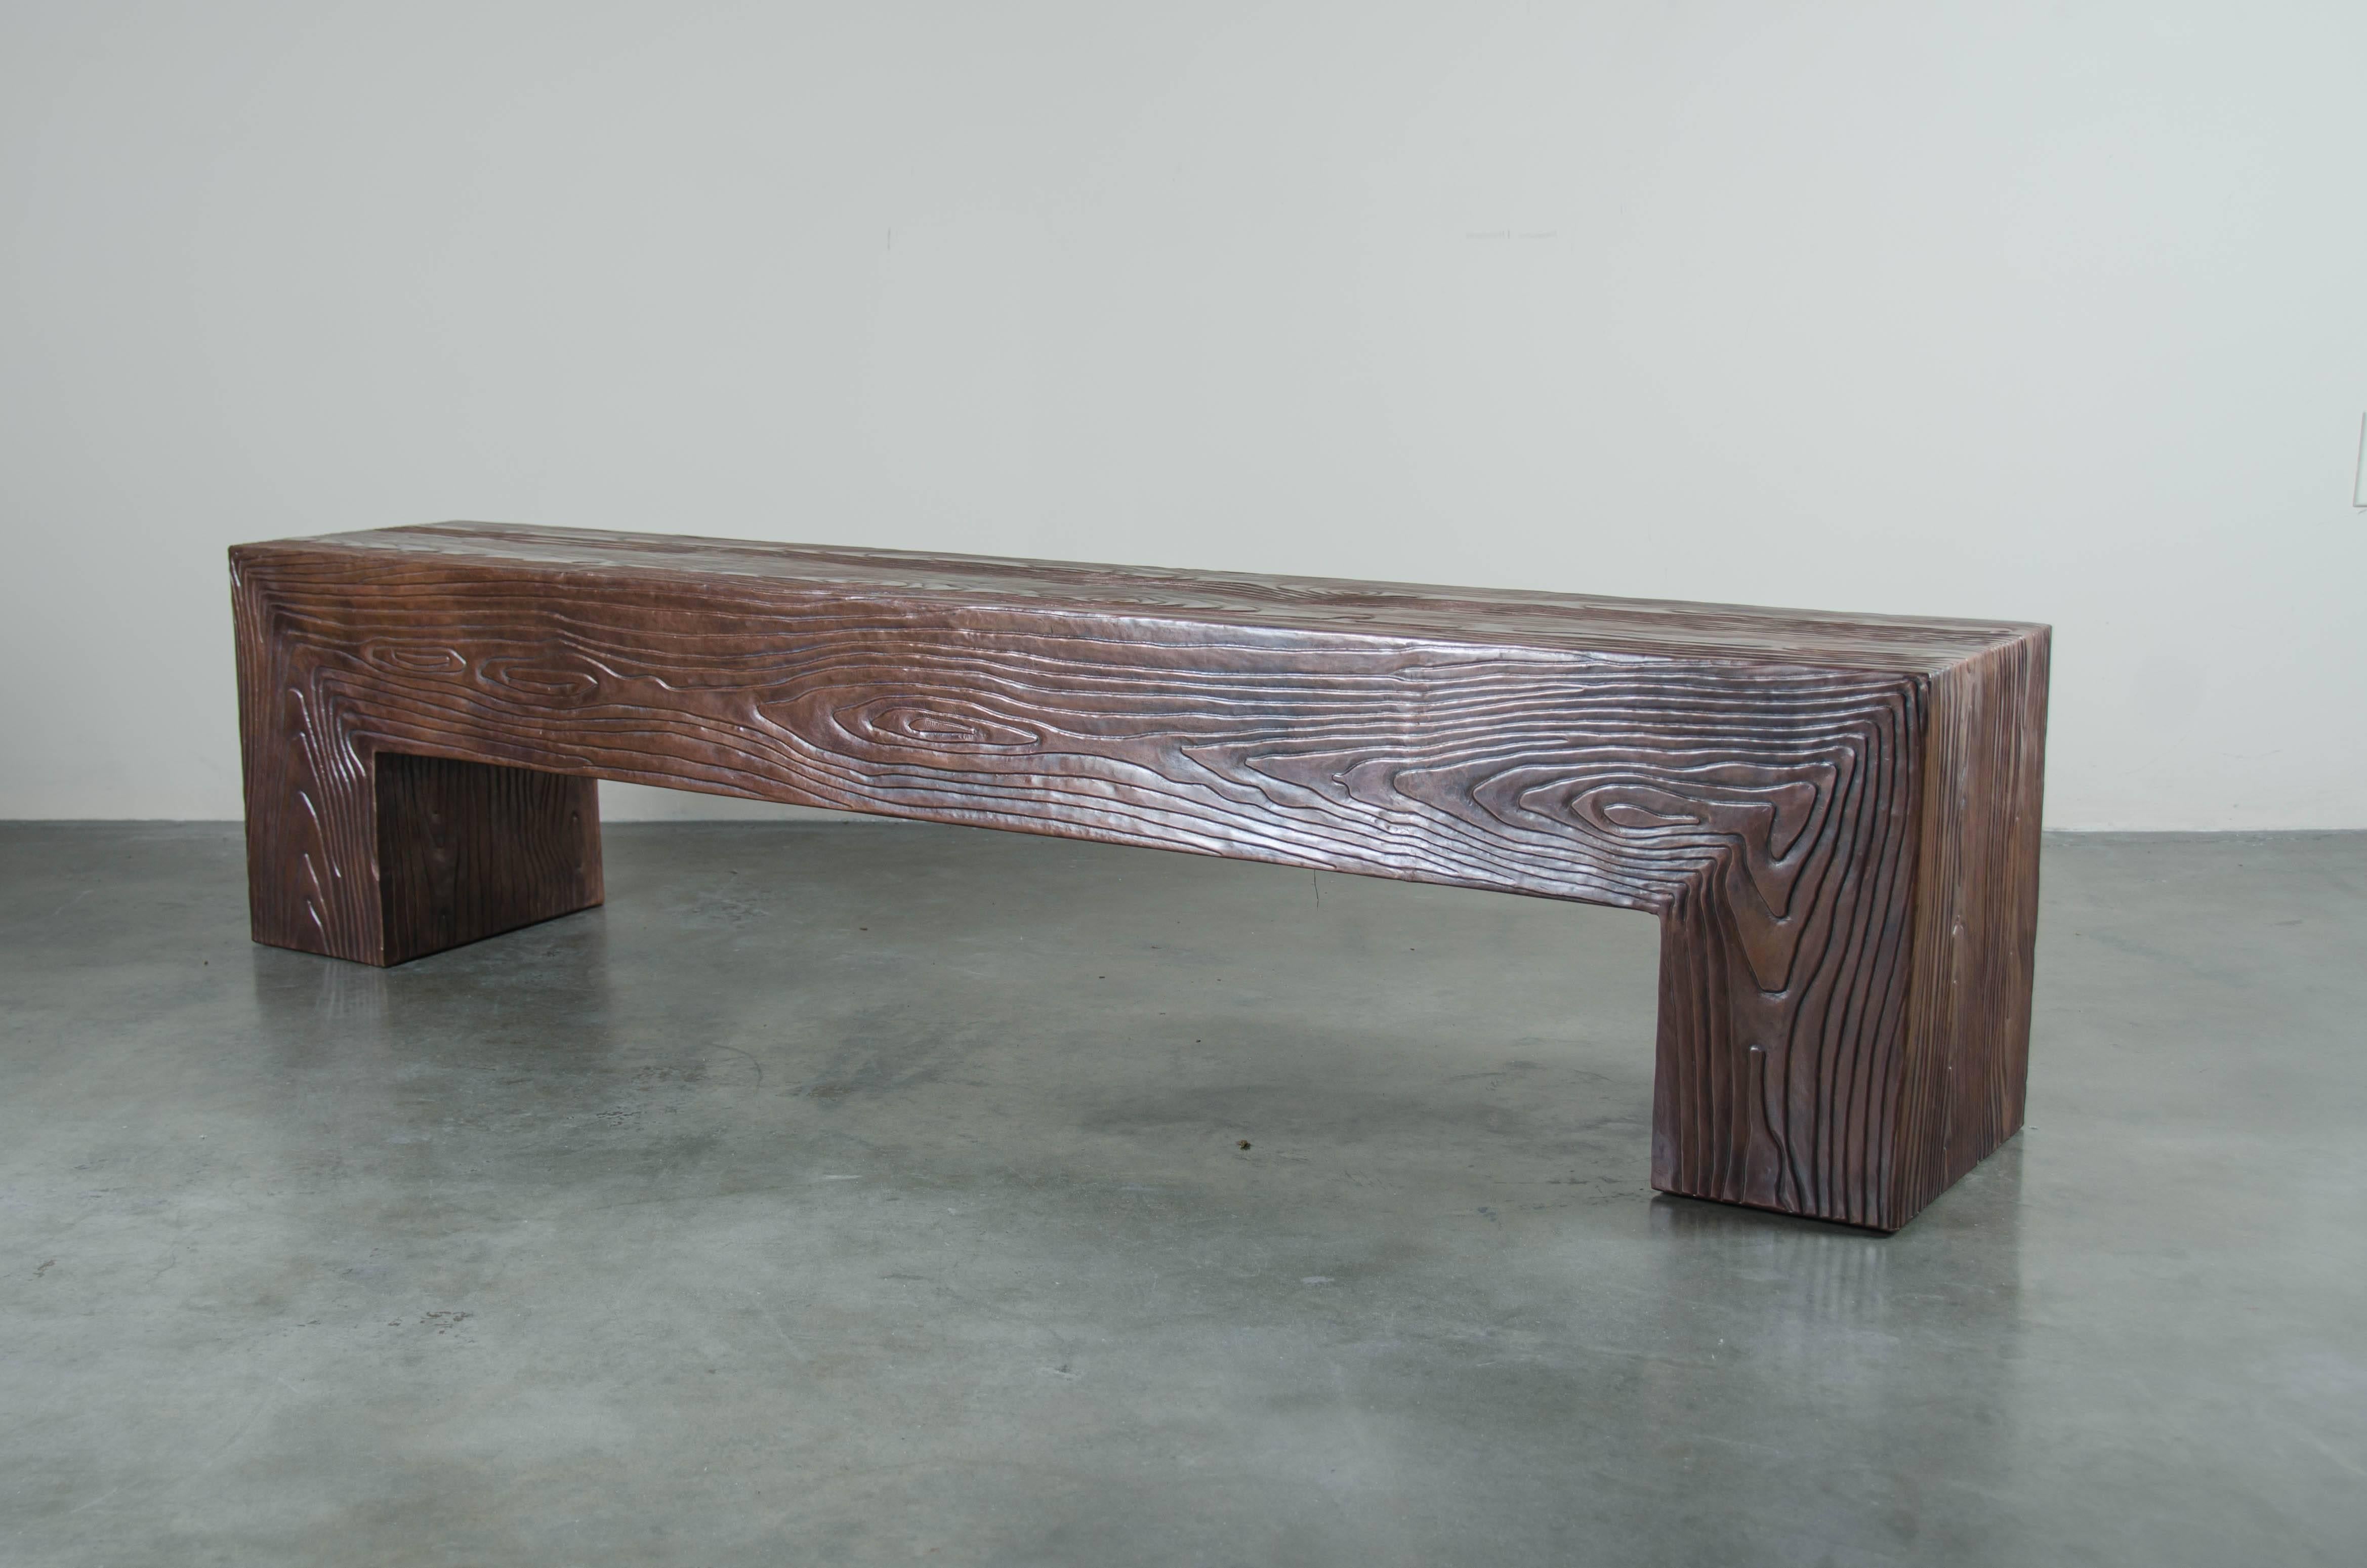 Repoussé Long Woodgrain Bench - Antique Copper by Robert Kuo, Limited Edition For Sale